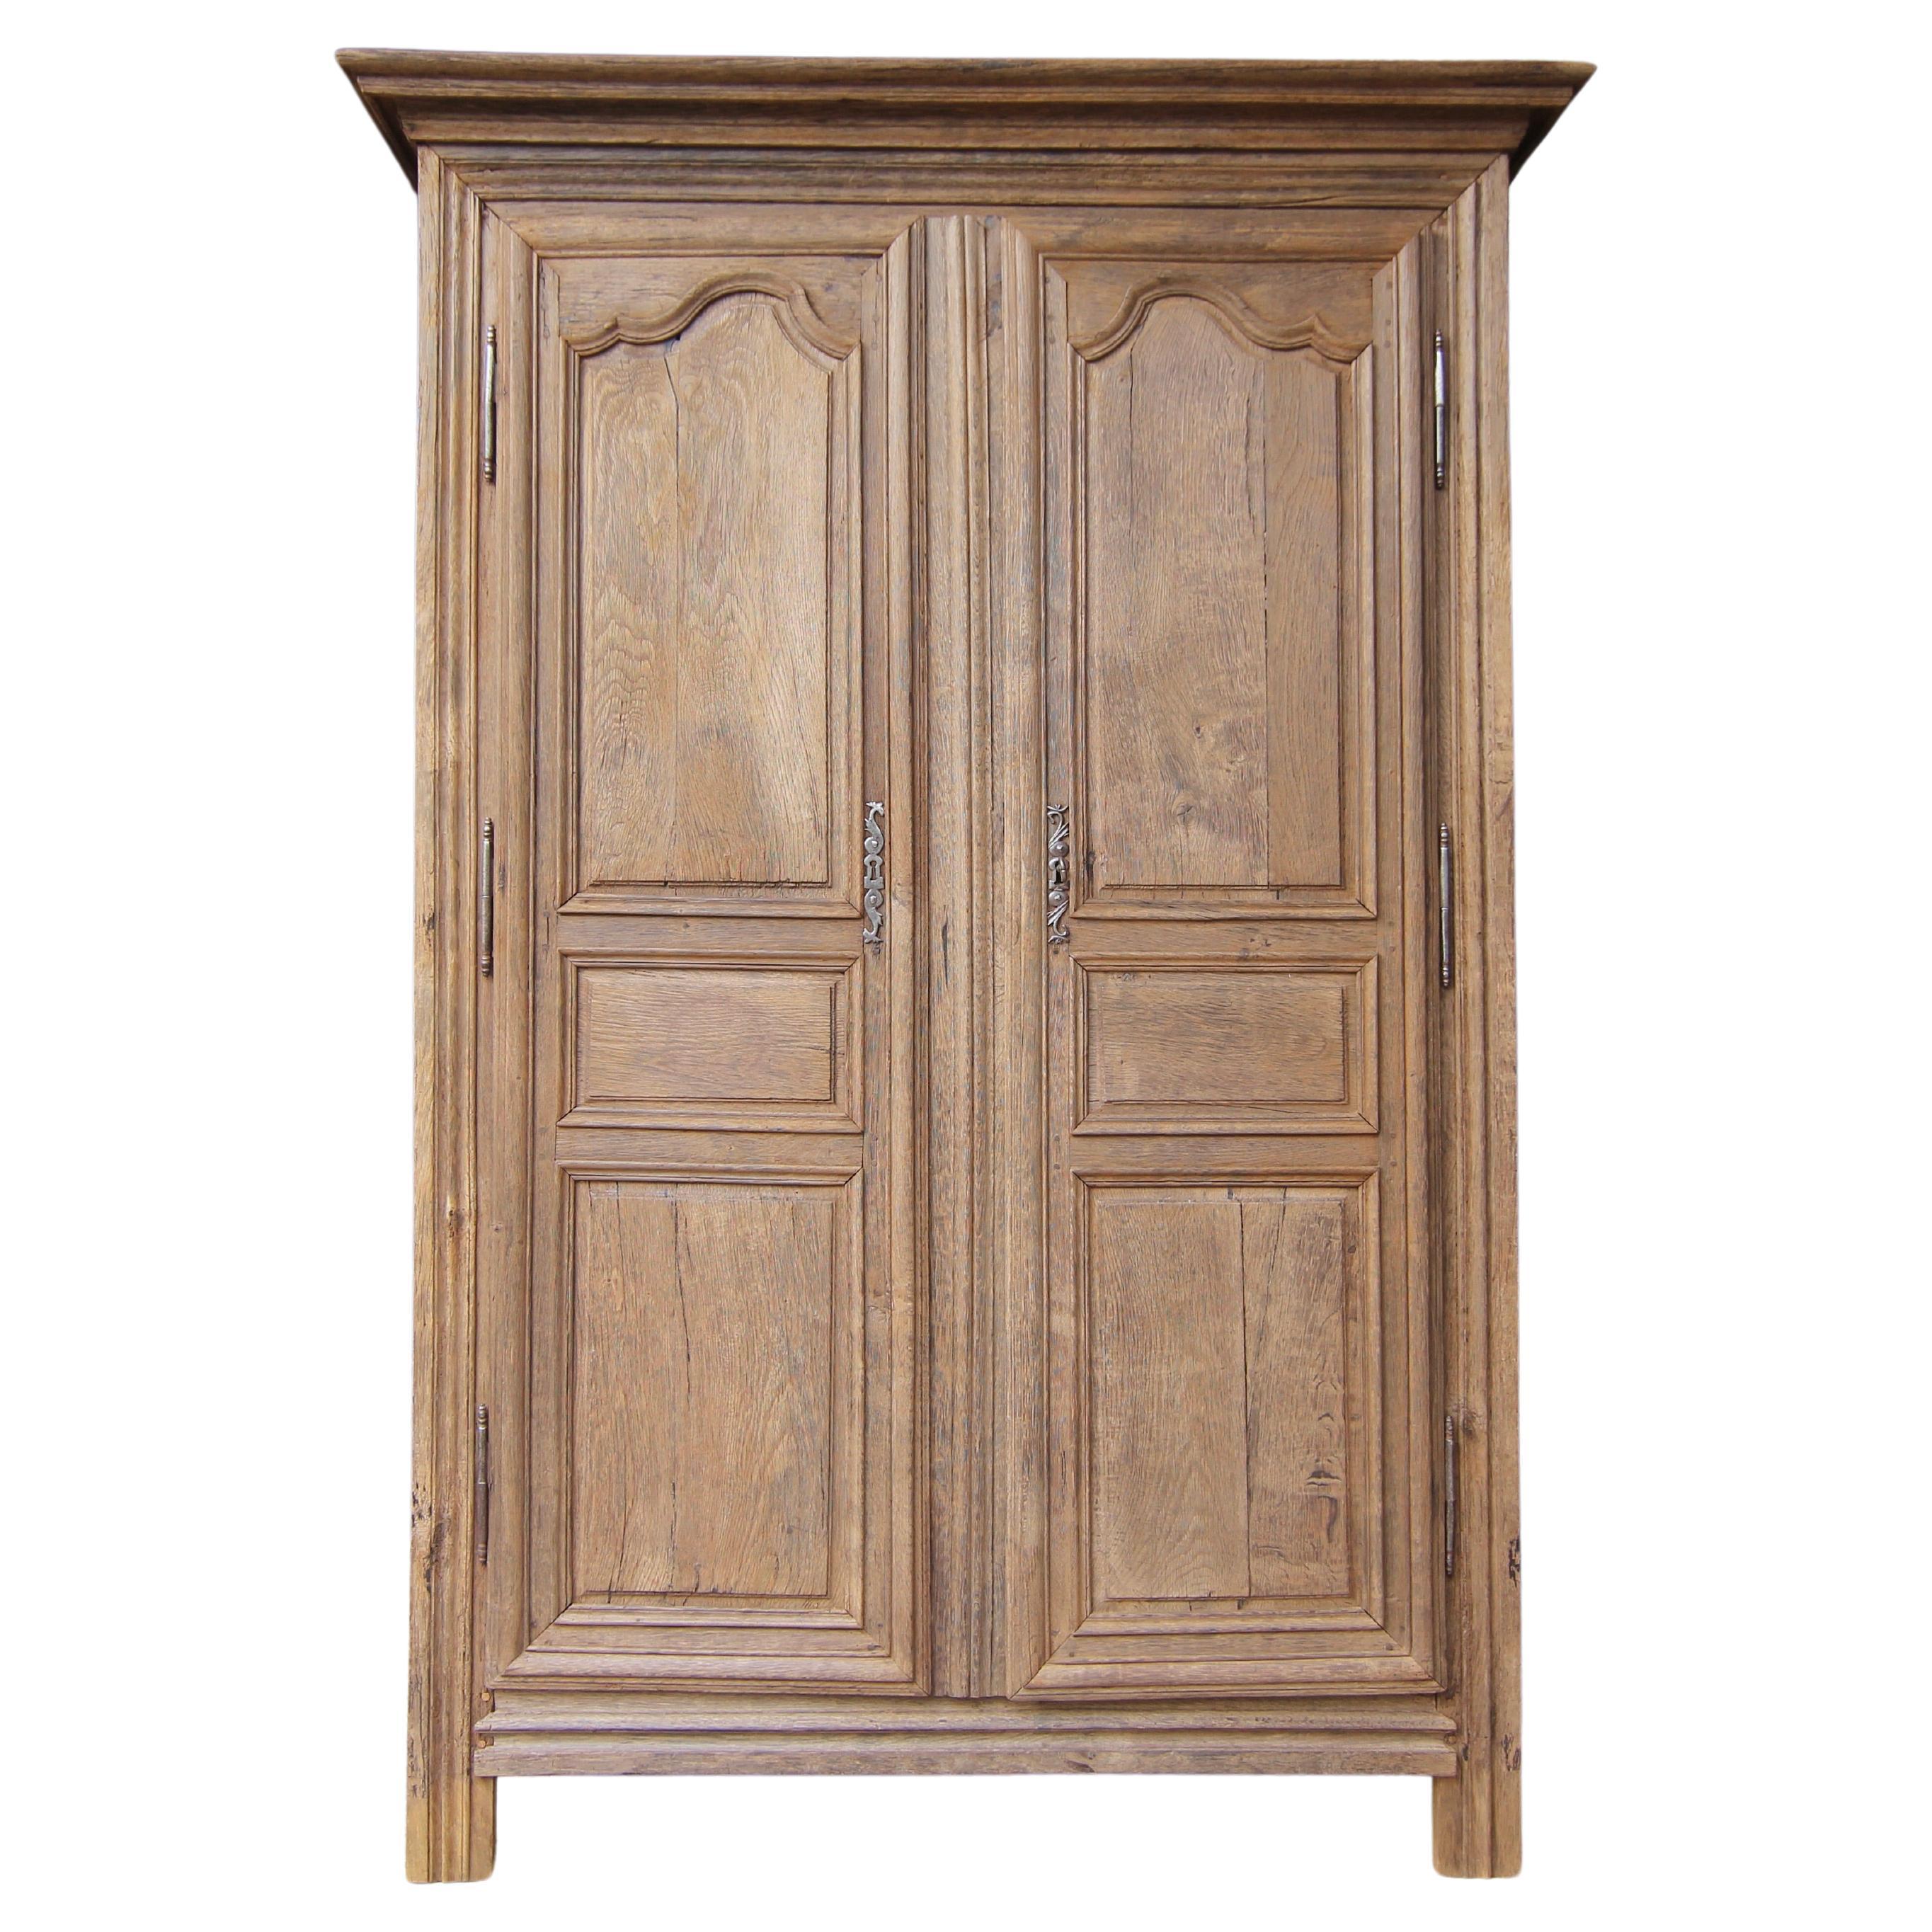 Early 19th Century French Provincial Rustic Oak Cabinet